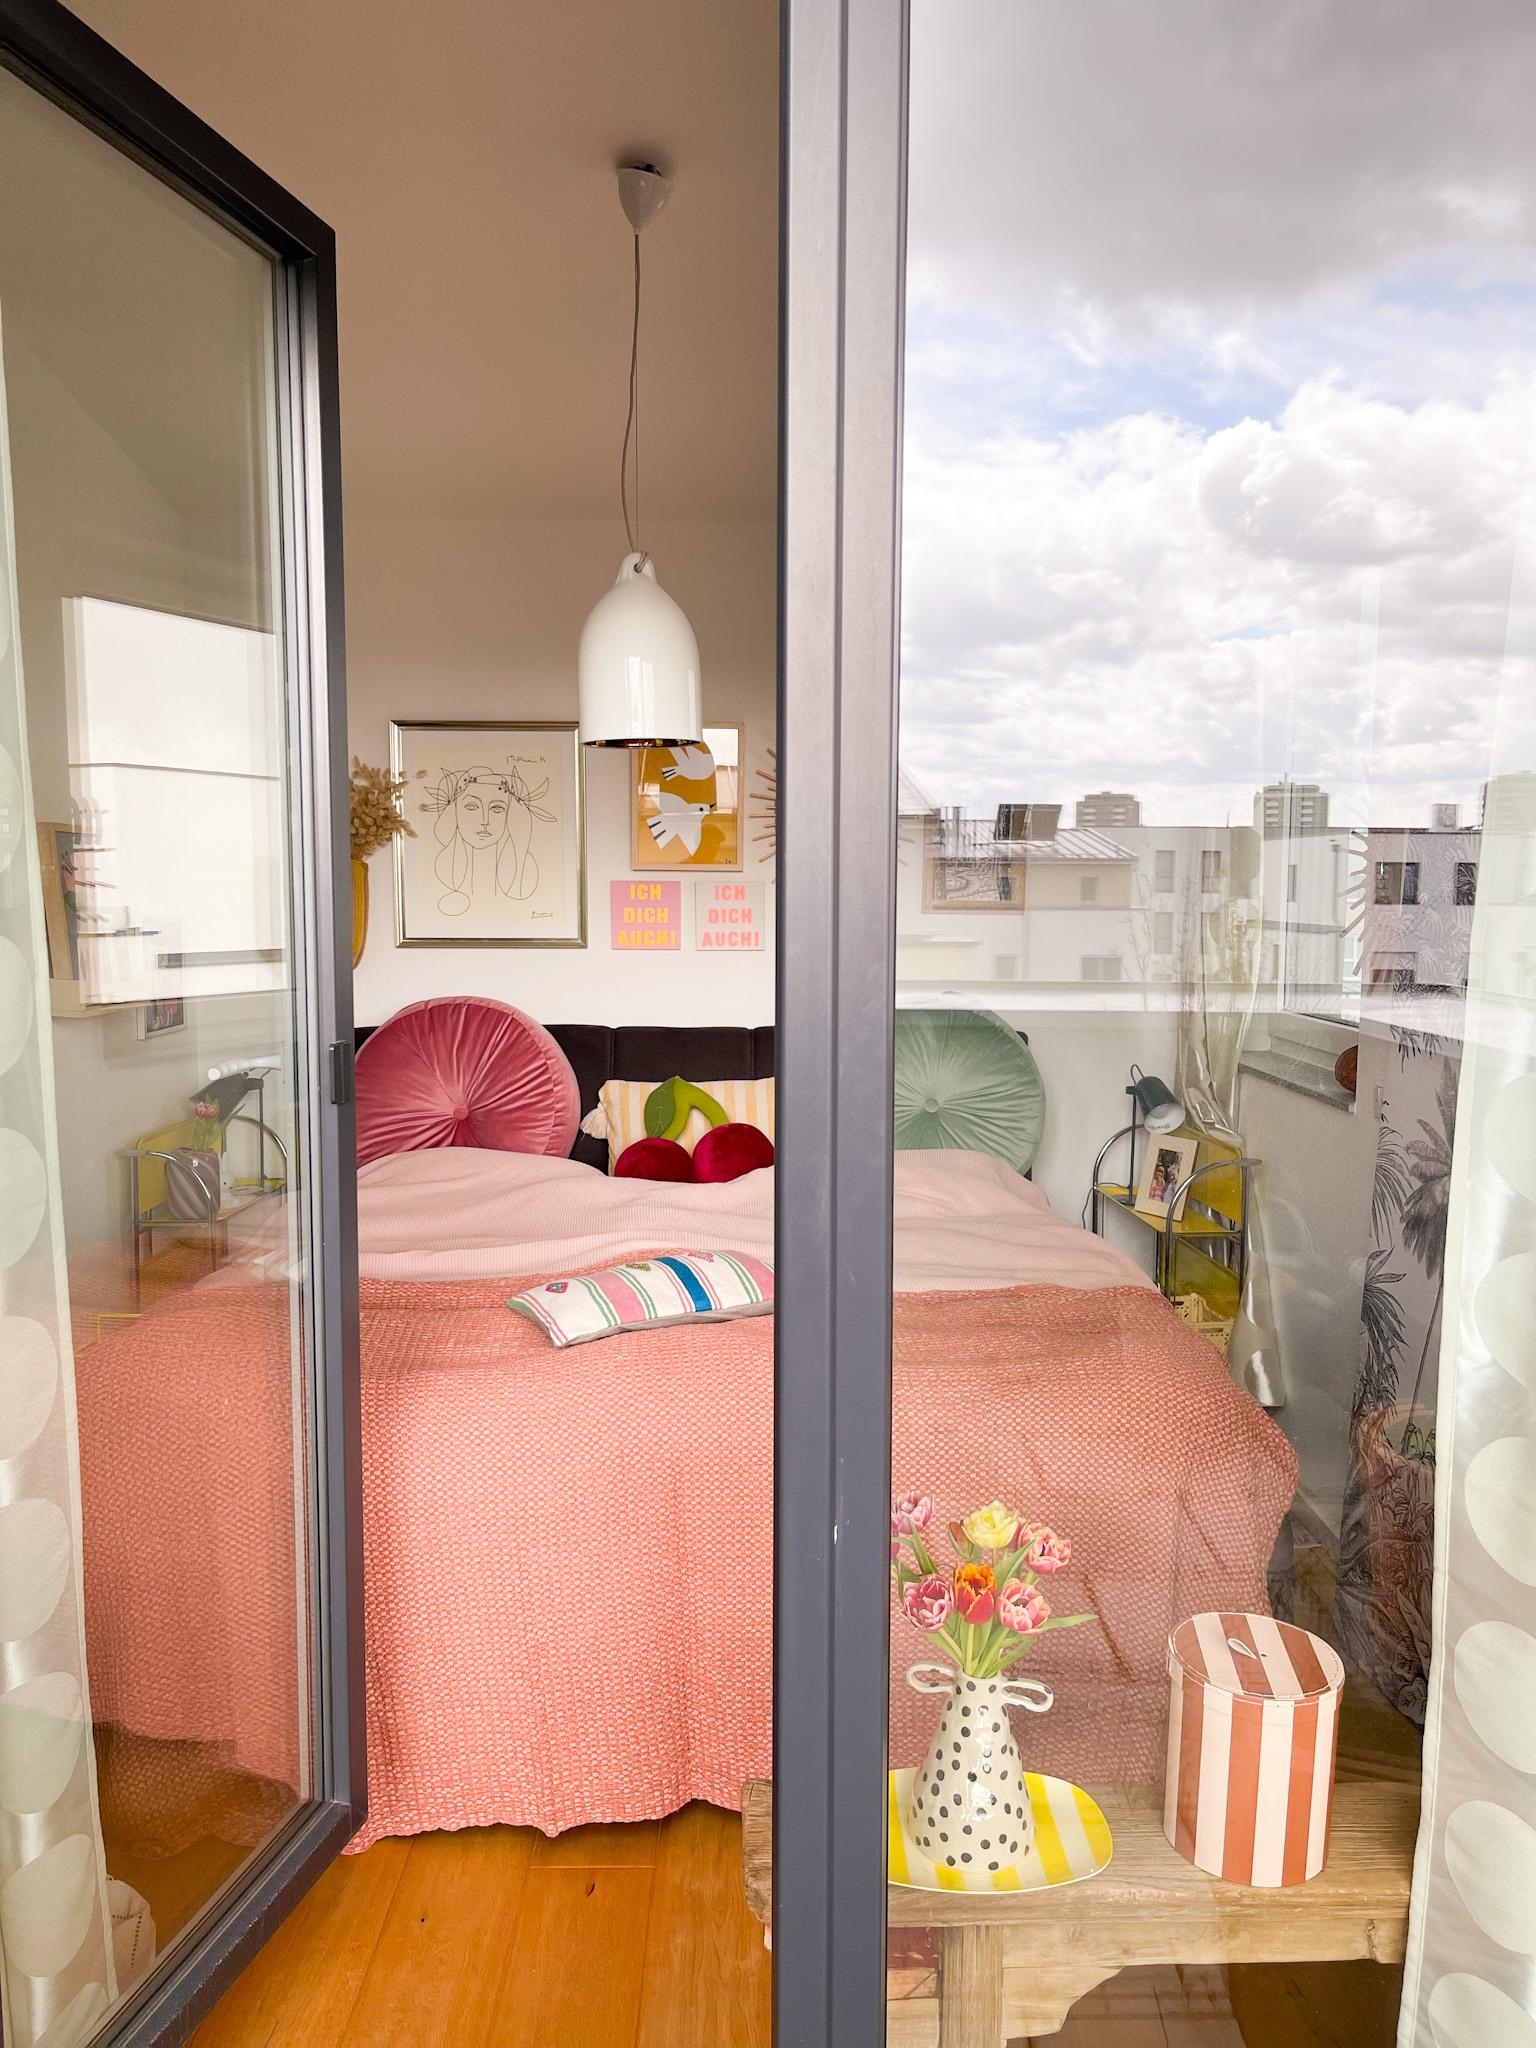 In the clouds #schlafzimmer #livingchallenge